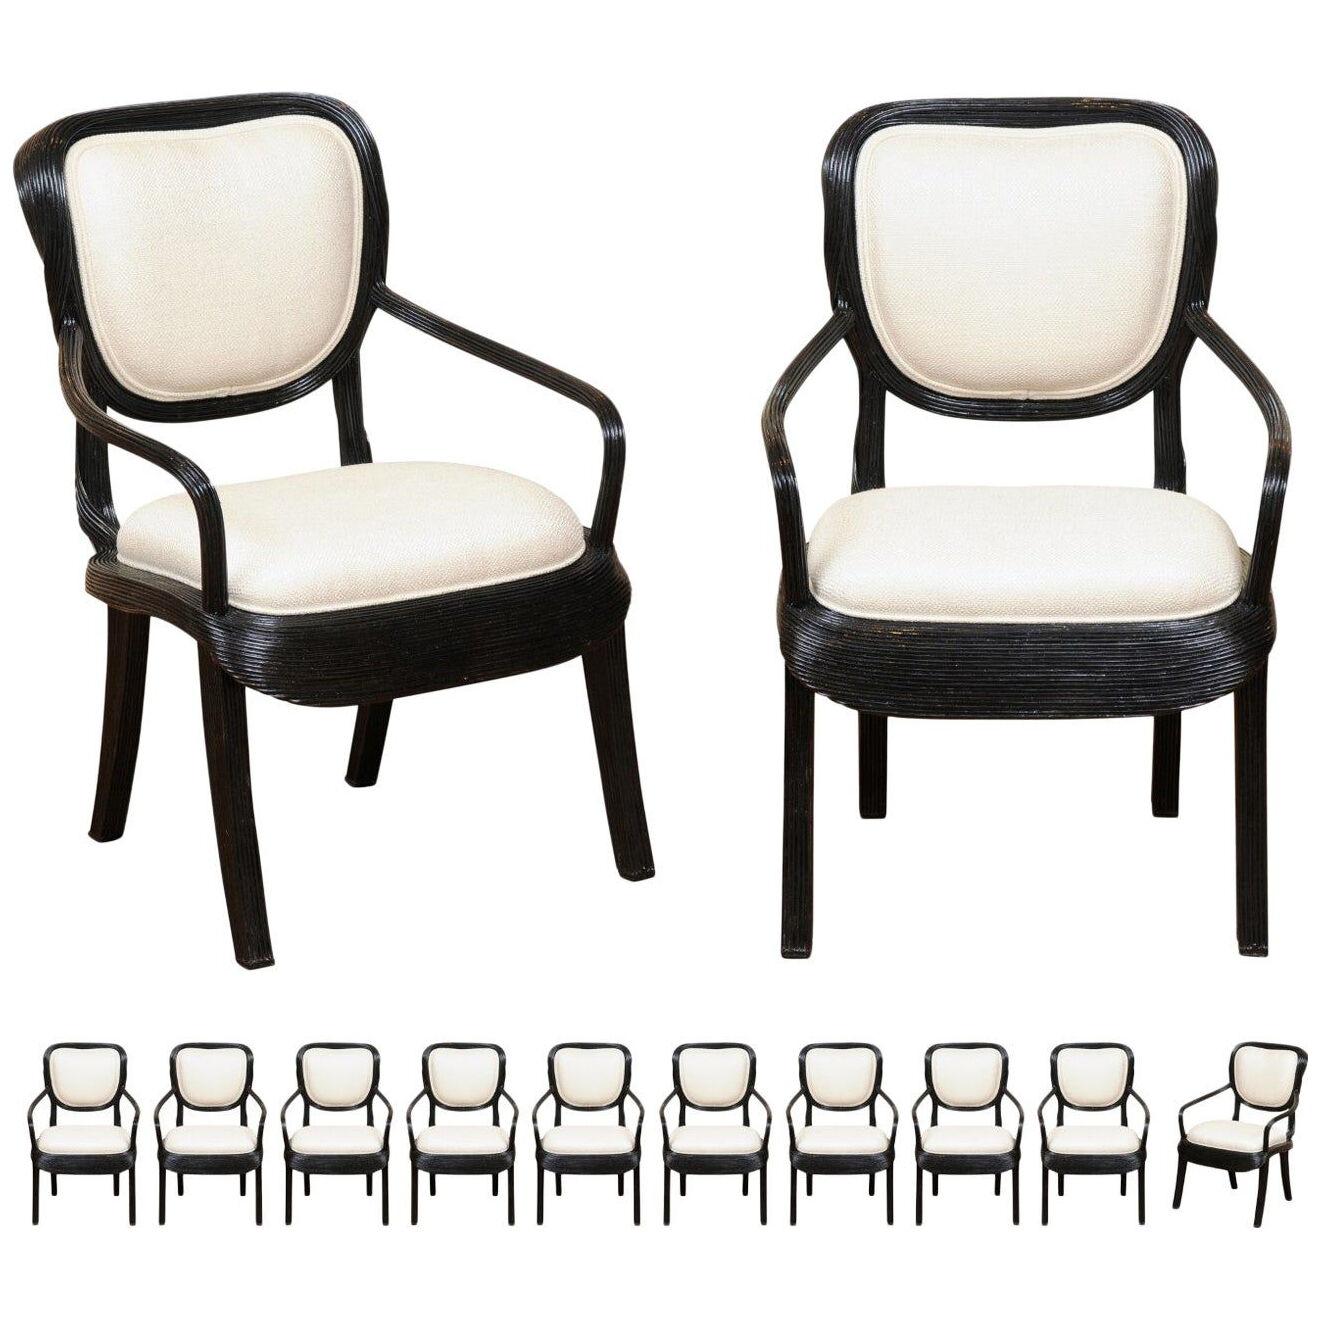 Extraordinary Set of 12 Trompe L'oiel Dining Chairs by Cobonpue, circa 1980